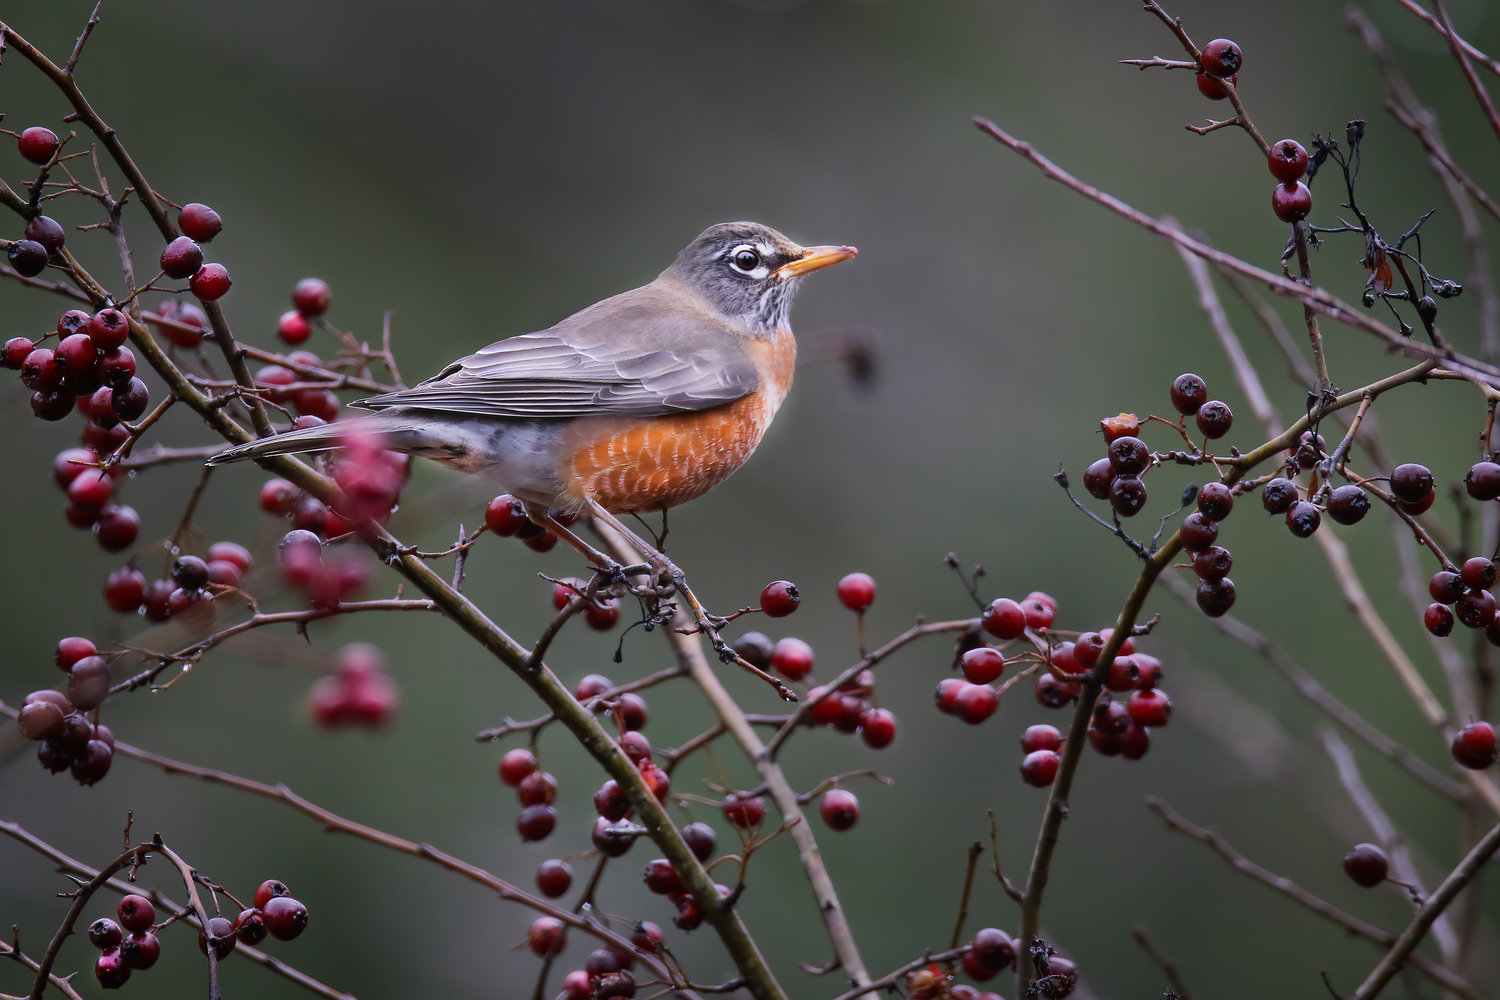 The American Robin is present in every neighborhood in Thurston County -- and very musical, too.